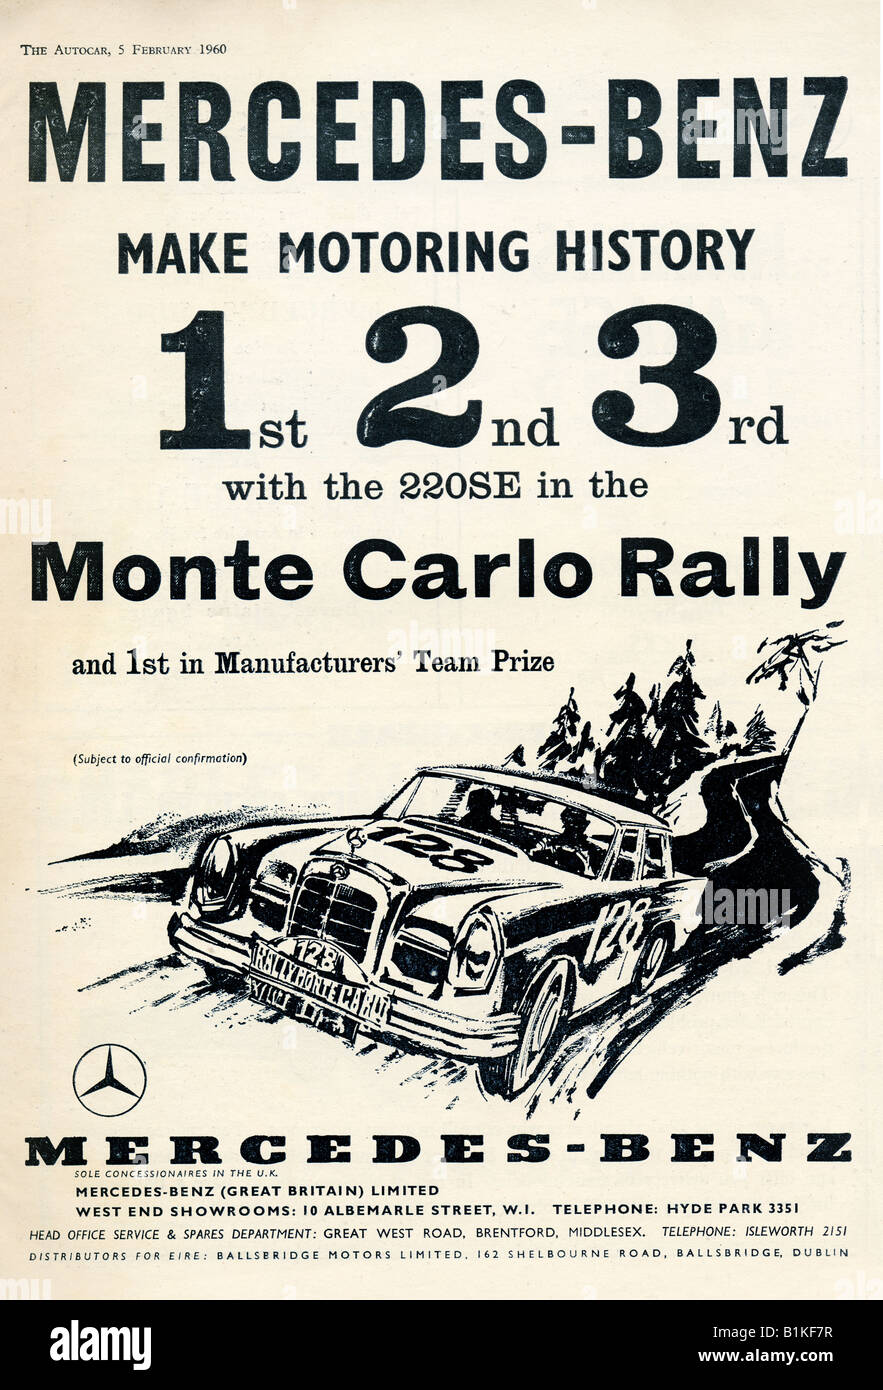 1960 advertisement for Mercedes-Benz 220SE success in the Monte Carlo Rally FOR EDITORIAL USE ONLY Stock Photo